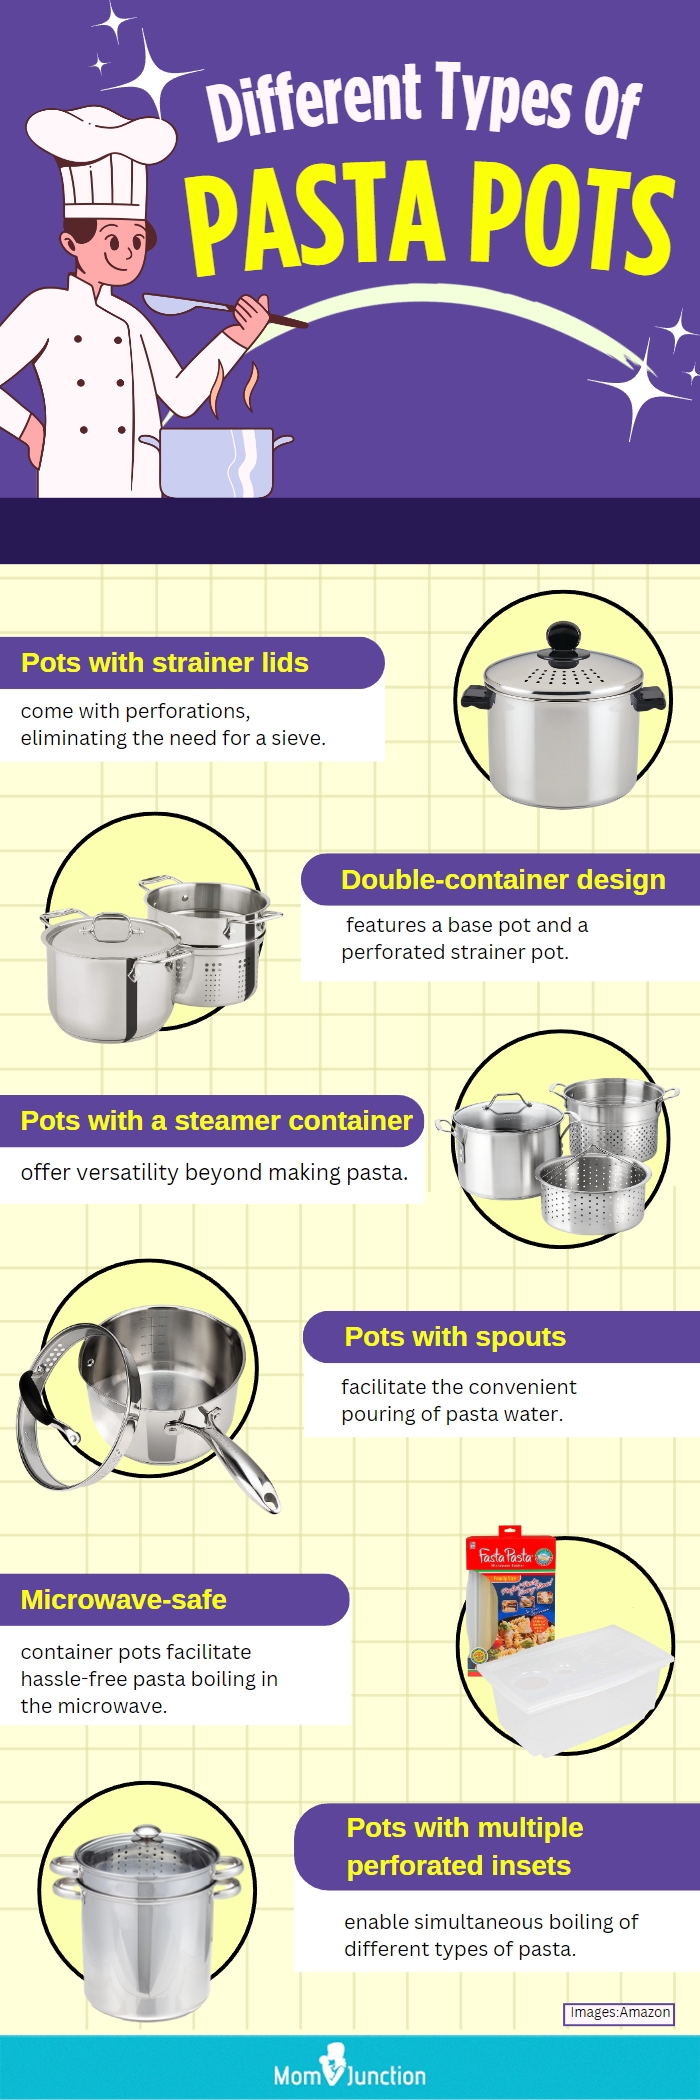 Different Types Of Pasta Pots (infographic)